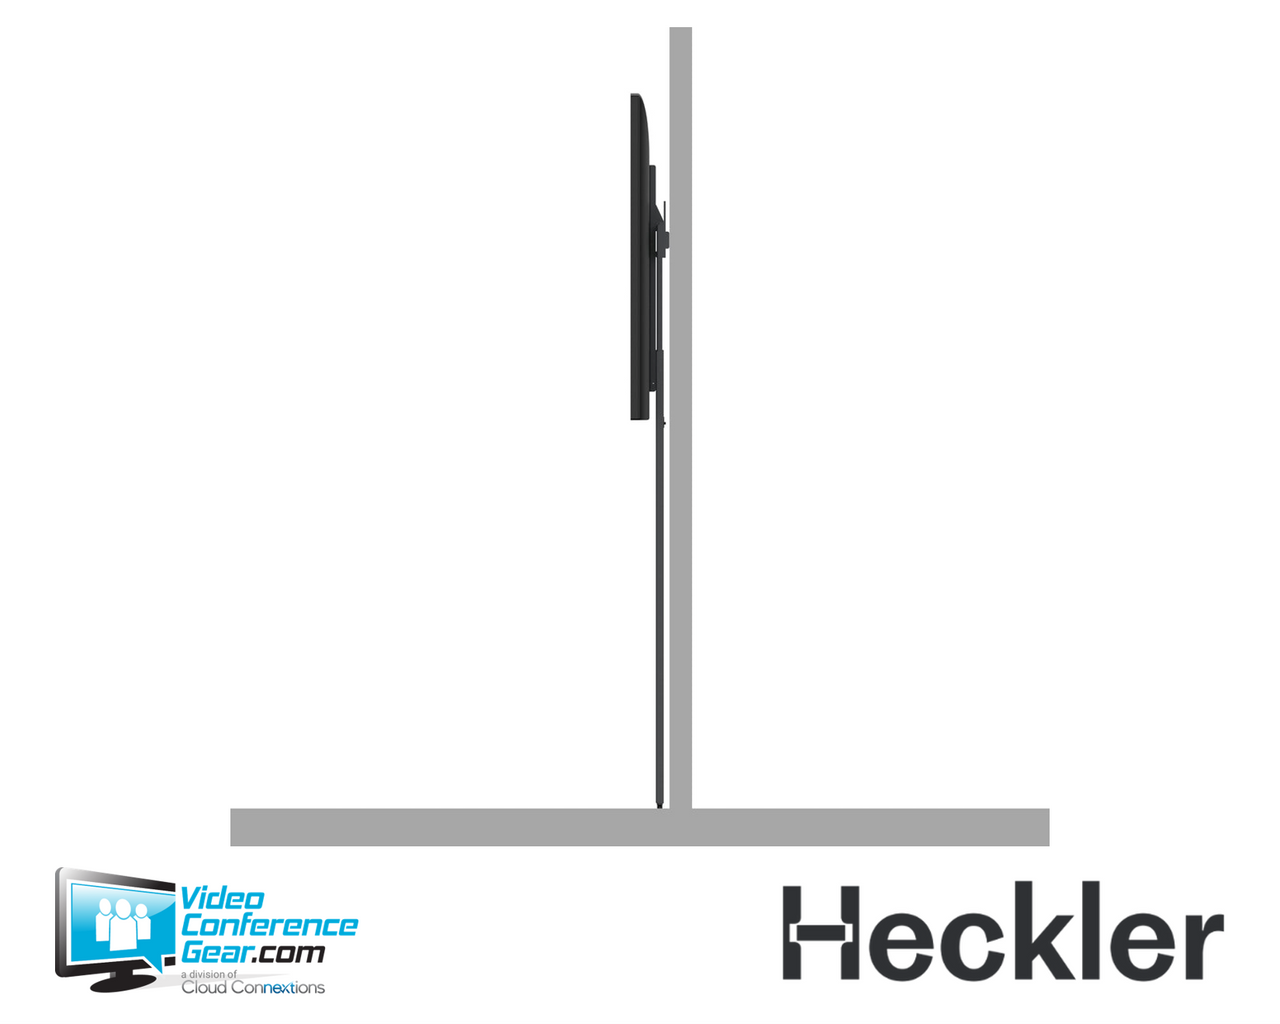 Heckler H800-BG AV Wall Structure and Support for Single Display - Black Grey